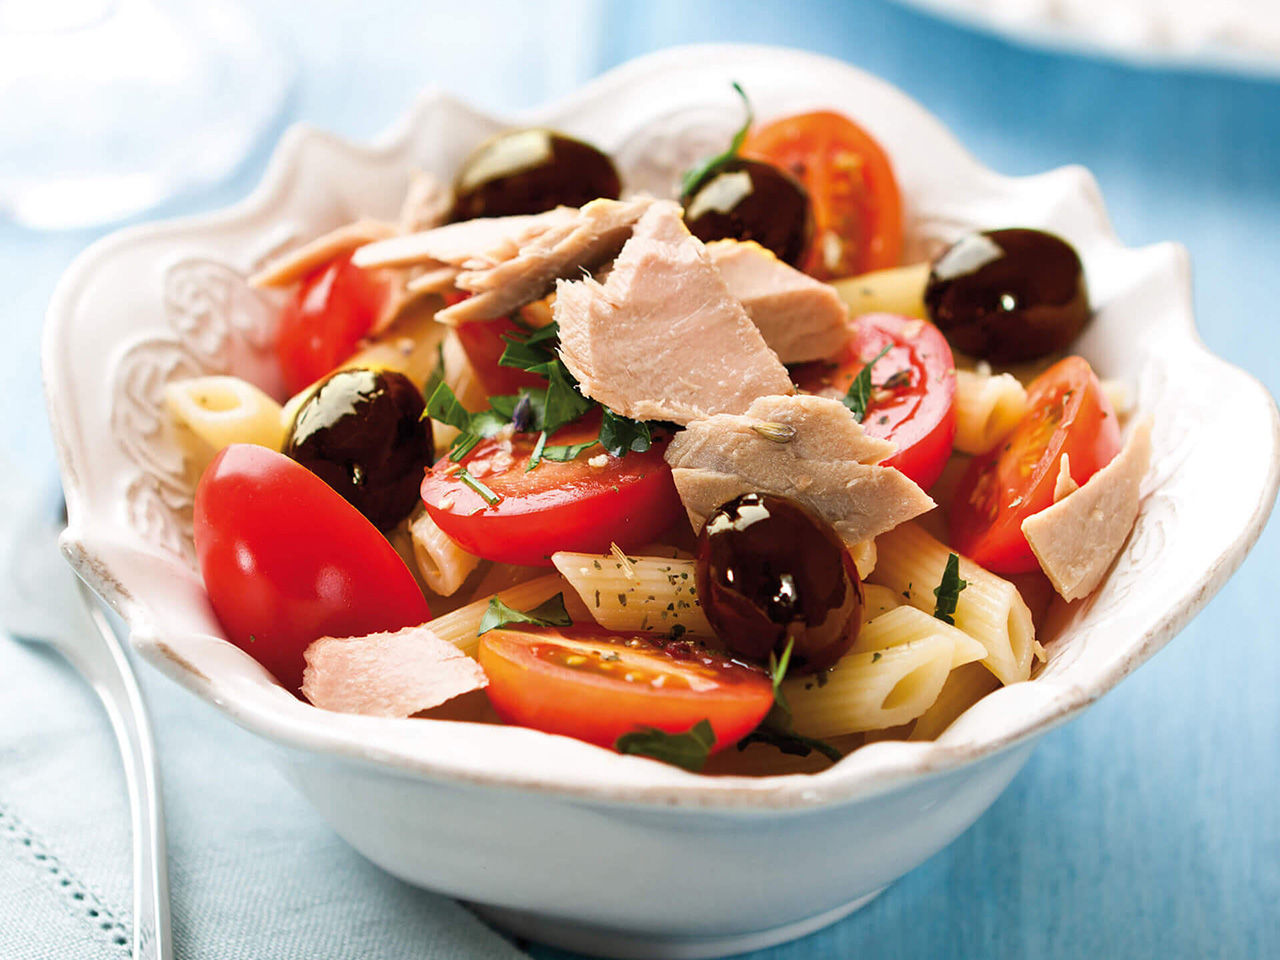 Cold pasta salad with tuna and tomatoes